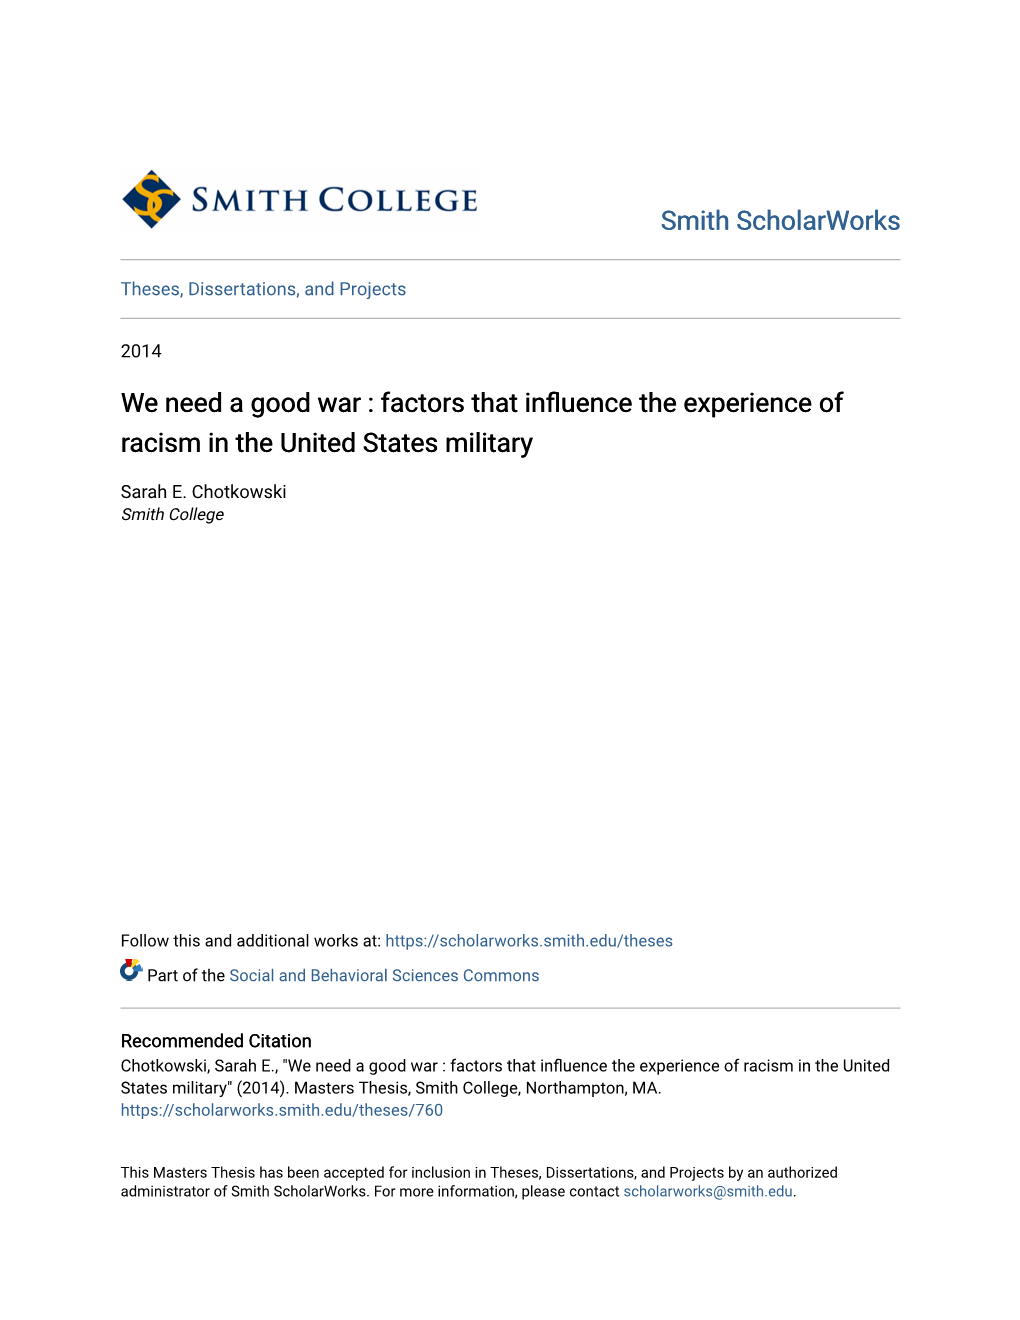 Factors That Influence the Experience of Racism in the United States Military